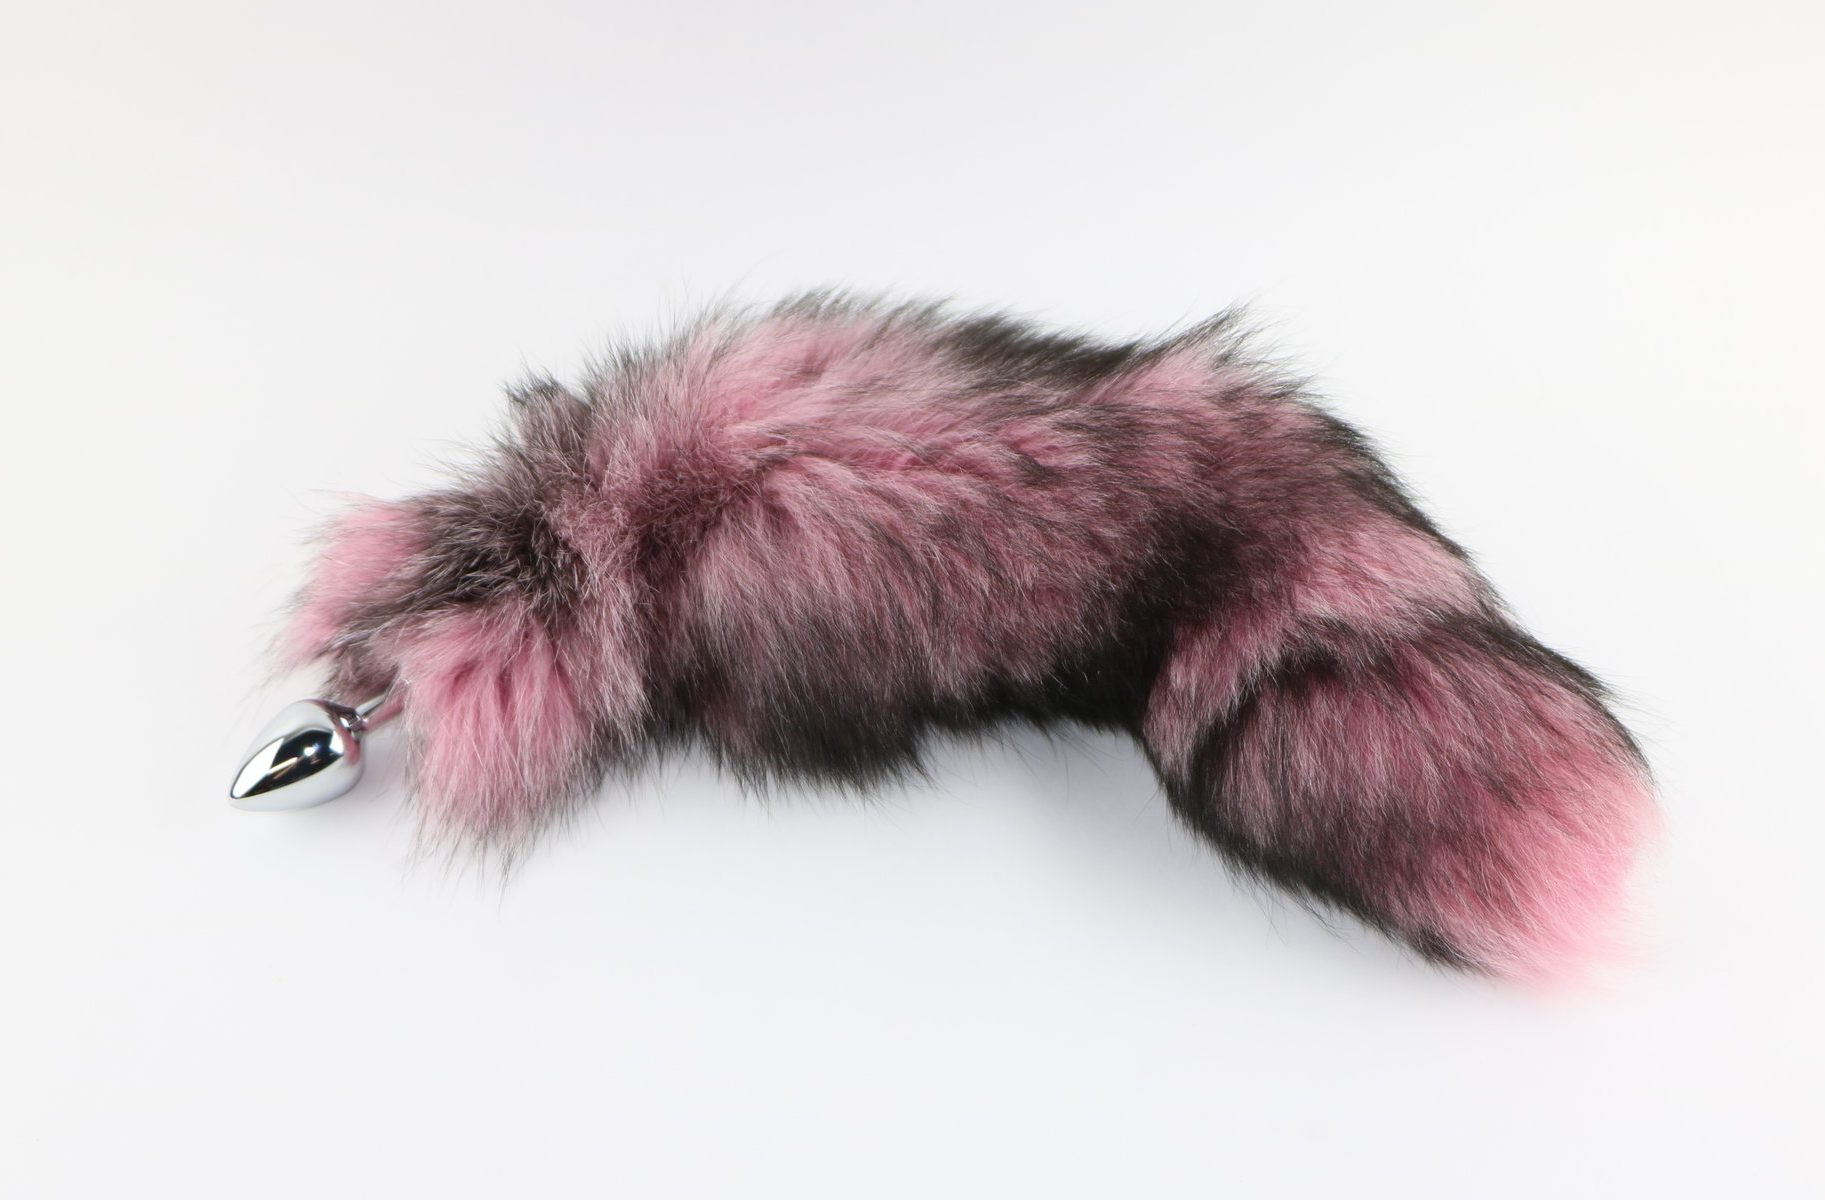 Picture of indigo fox tail dyed light pink from Spank Academy website. Tail is pink with black accents and attached to a stainless steel plug.